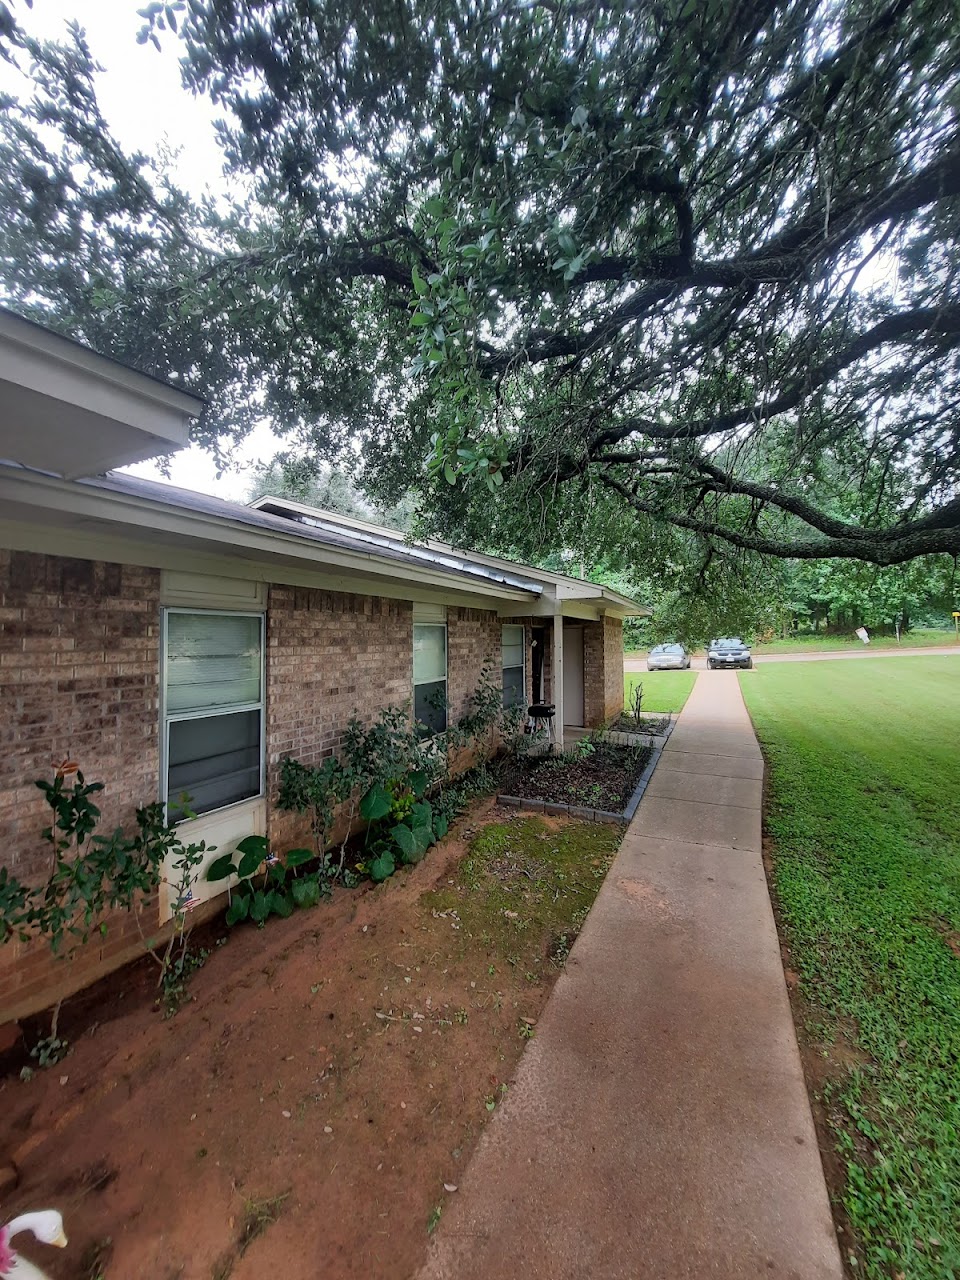 Photo of MURCHISON STREET APT. Affordable housing located at 1600 E MURCHISON ST PALESTINE, TX 75801